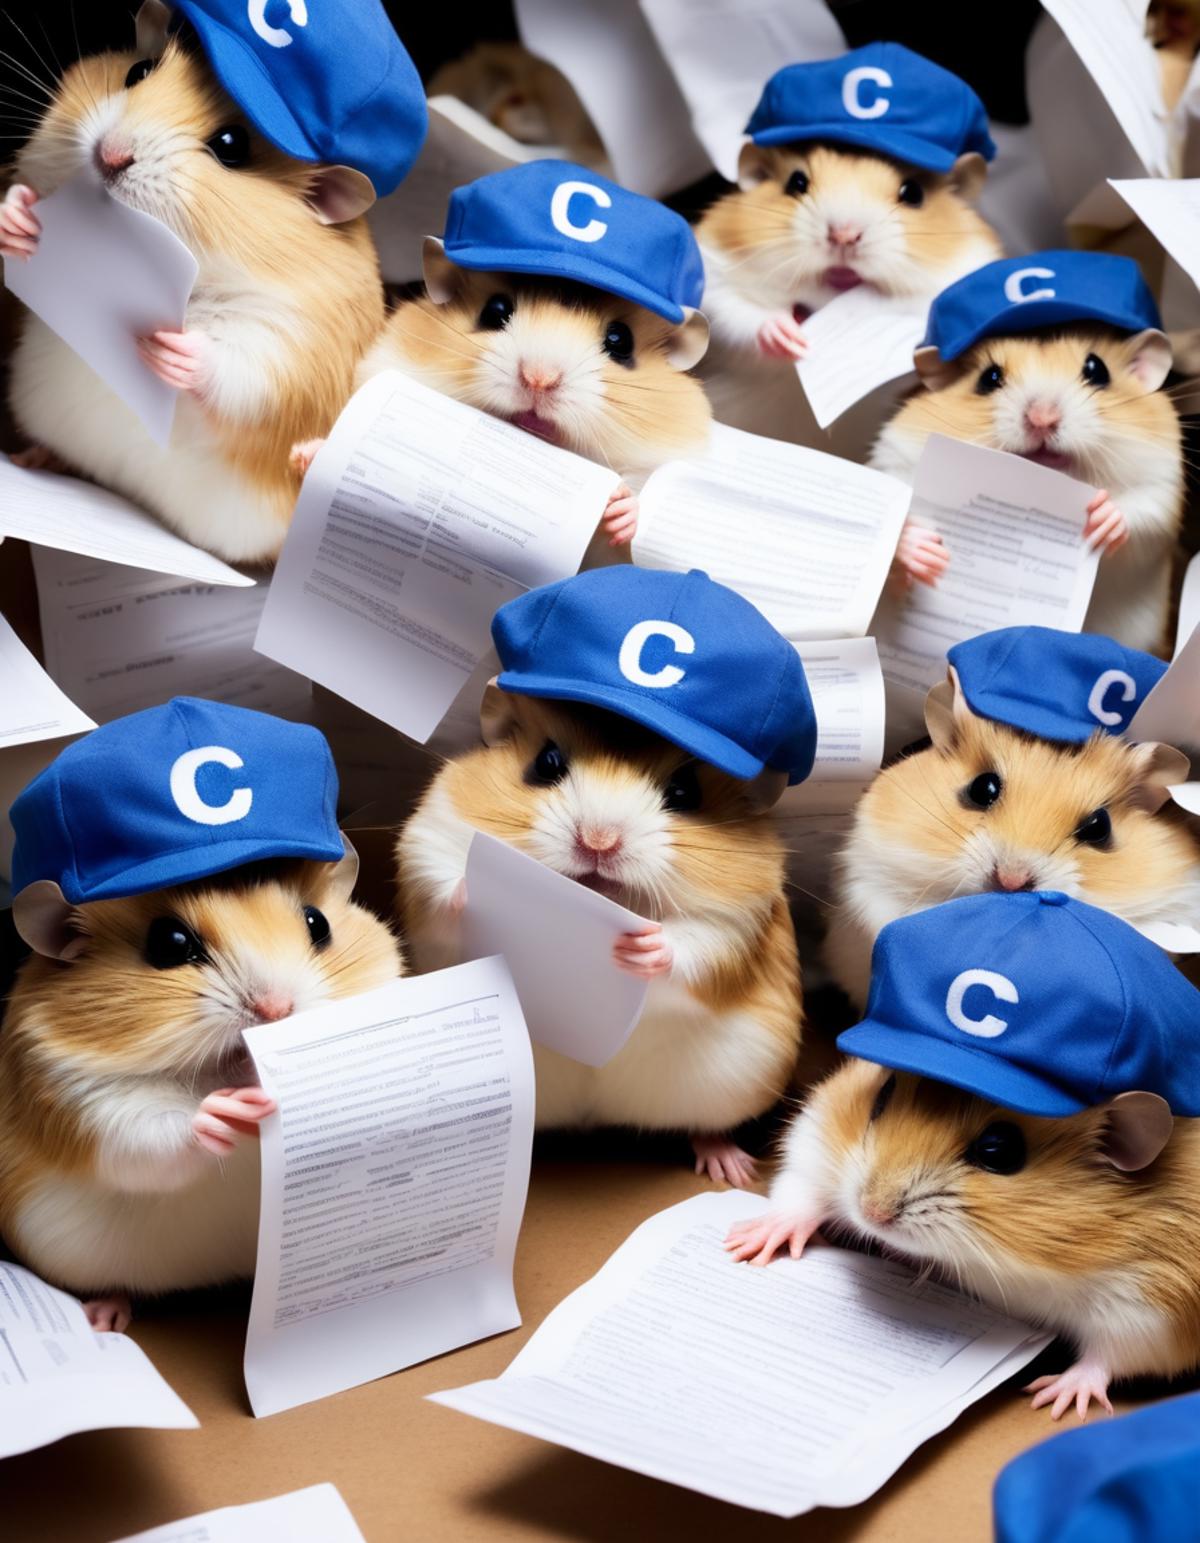 A group of hamsters wearing blue hats and reading papers.